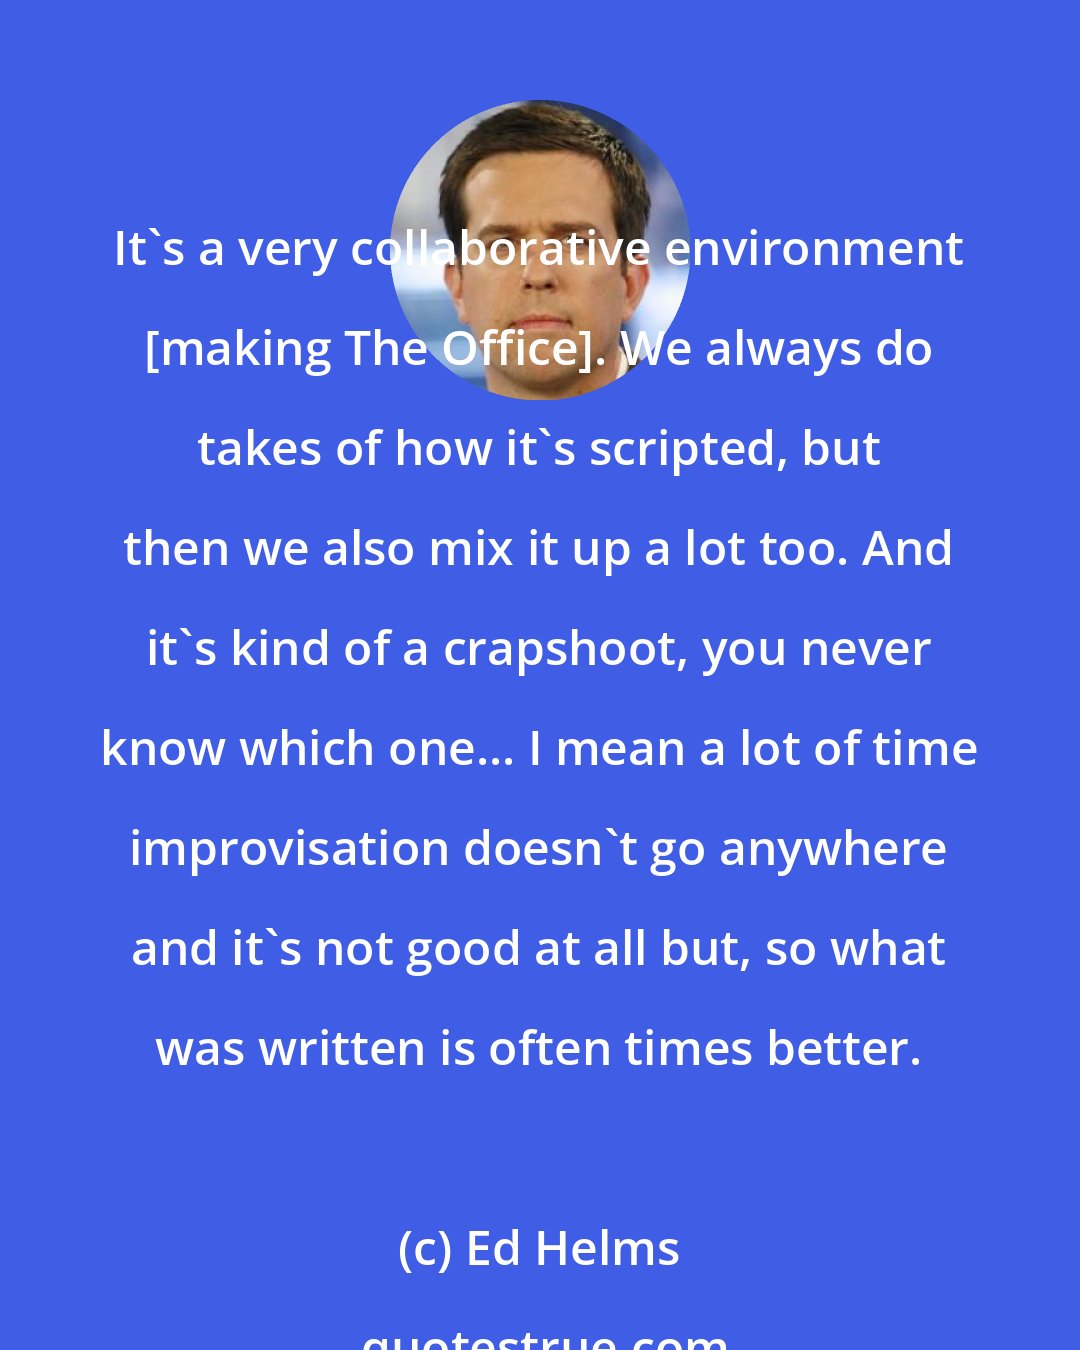 Ed Helms: It's a very collaborative environment [making The Office]. We always do takes of how it's scripted, but then we also mix it up a lot too. And it's kind of a crapshoot, you never know which one... I mean a lot of time improvisation doesn't go anywhere and it's not good at all but, so what was written is often times better.